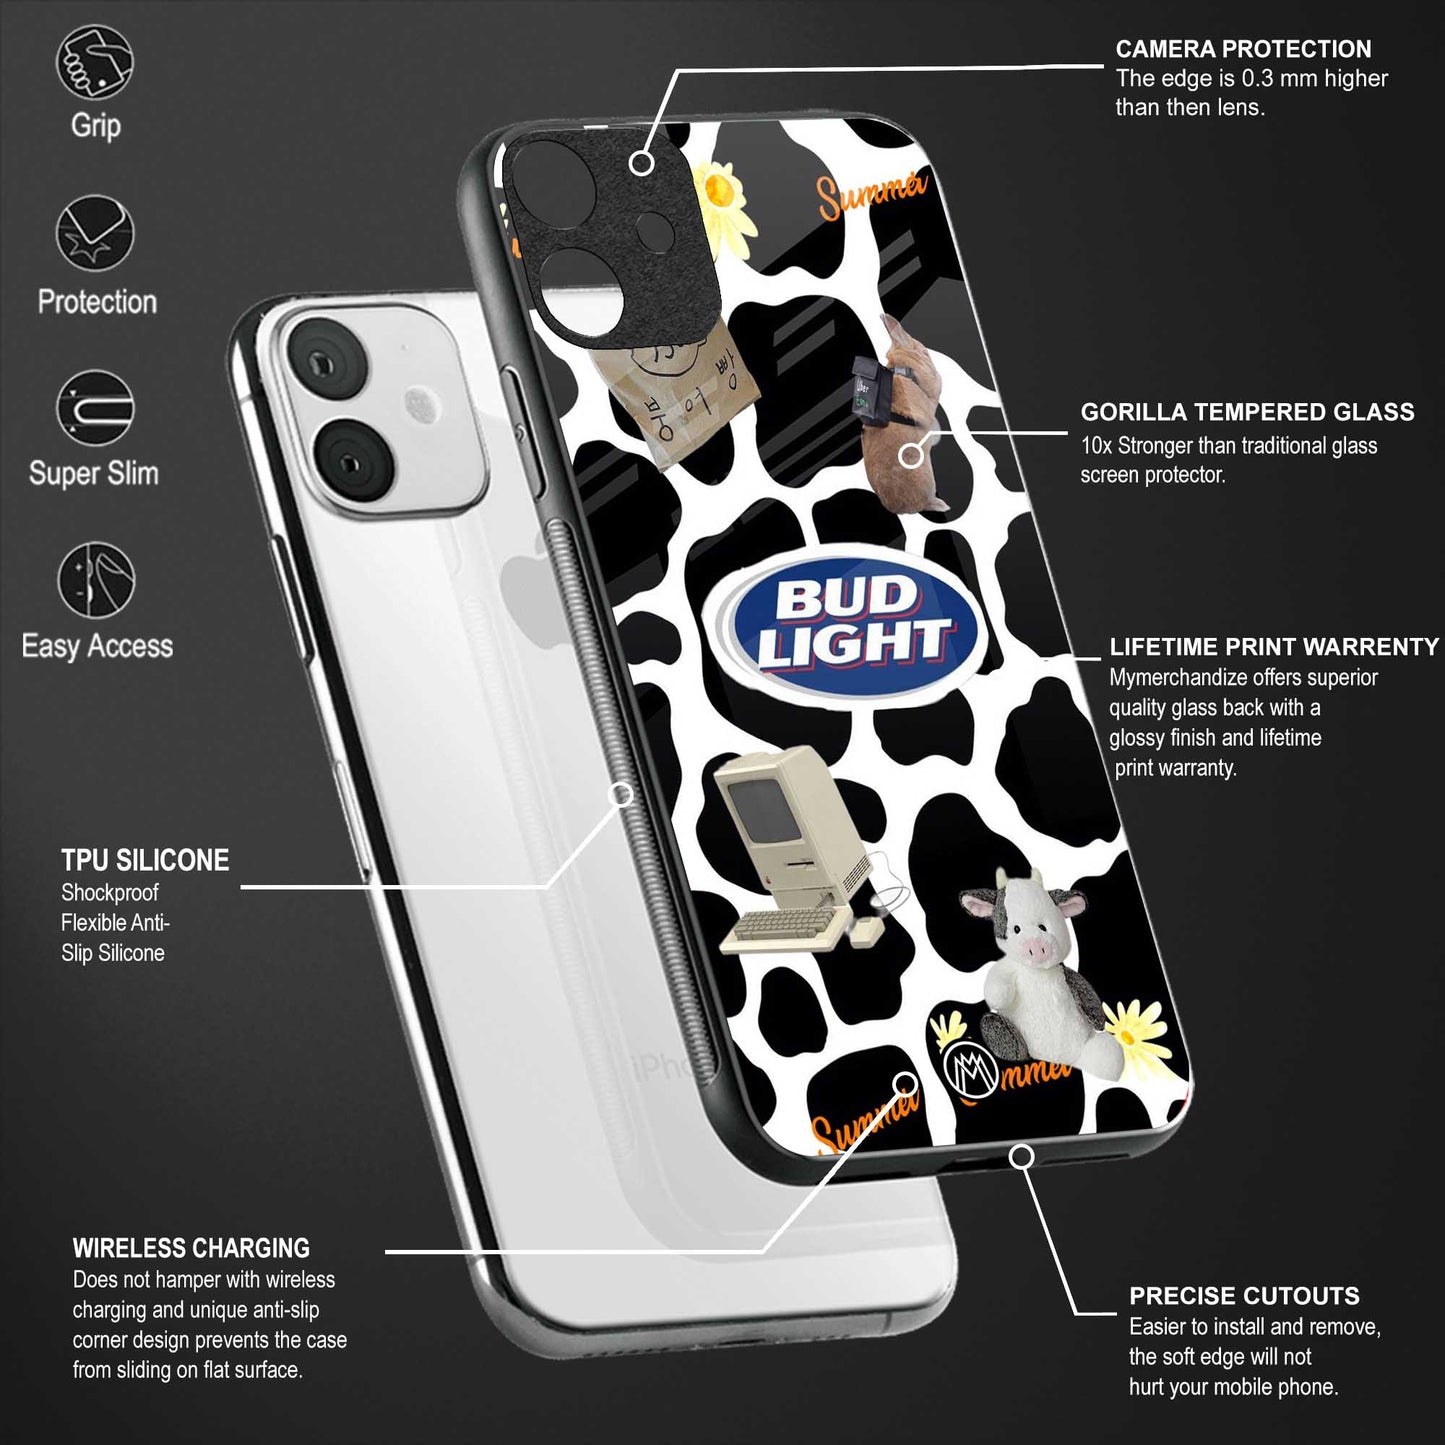 moo moo summer vibes back phone cover | glass case for realme narzo 50a